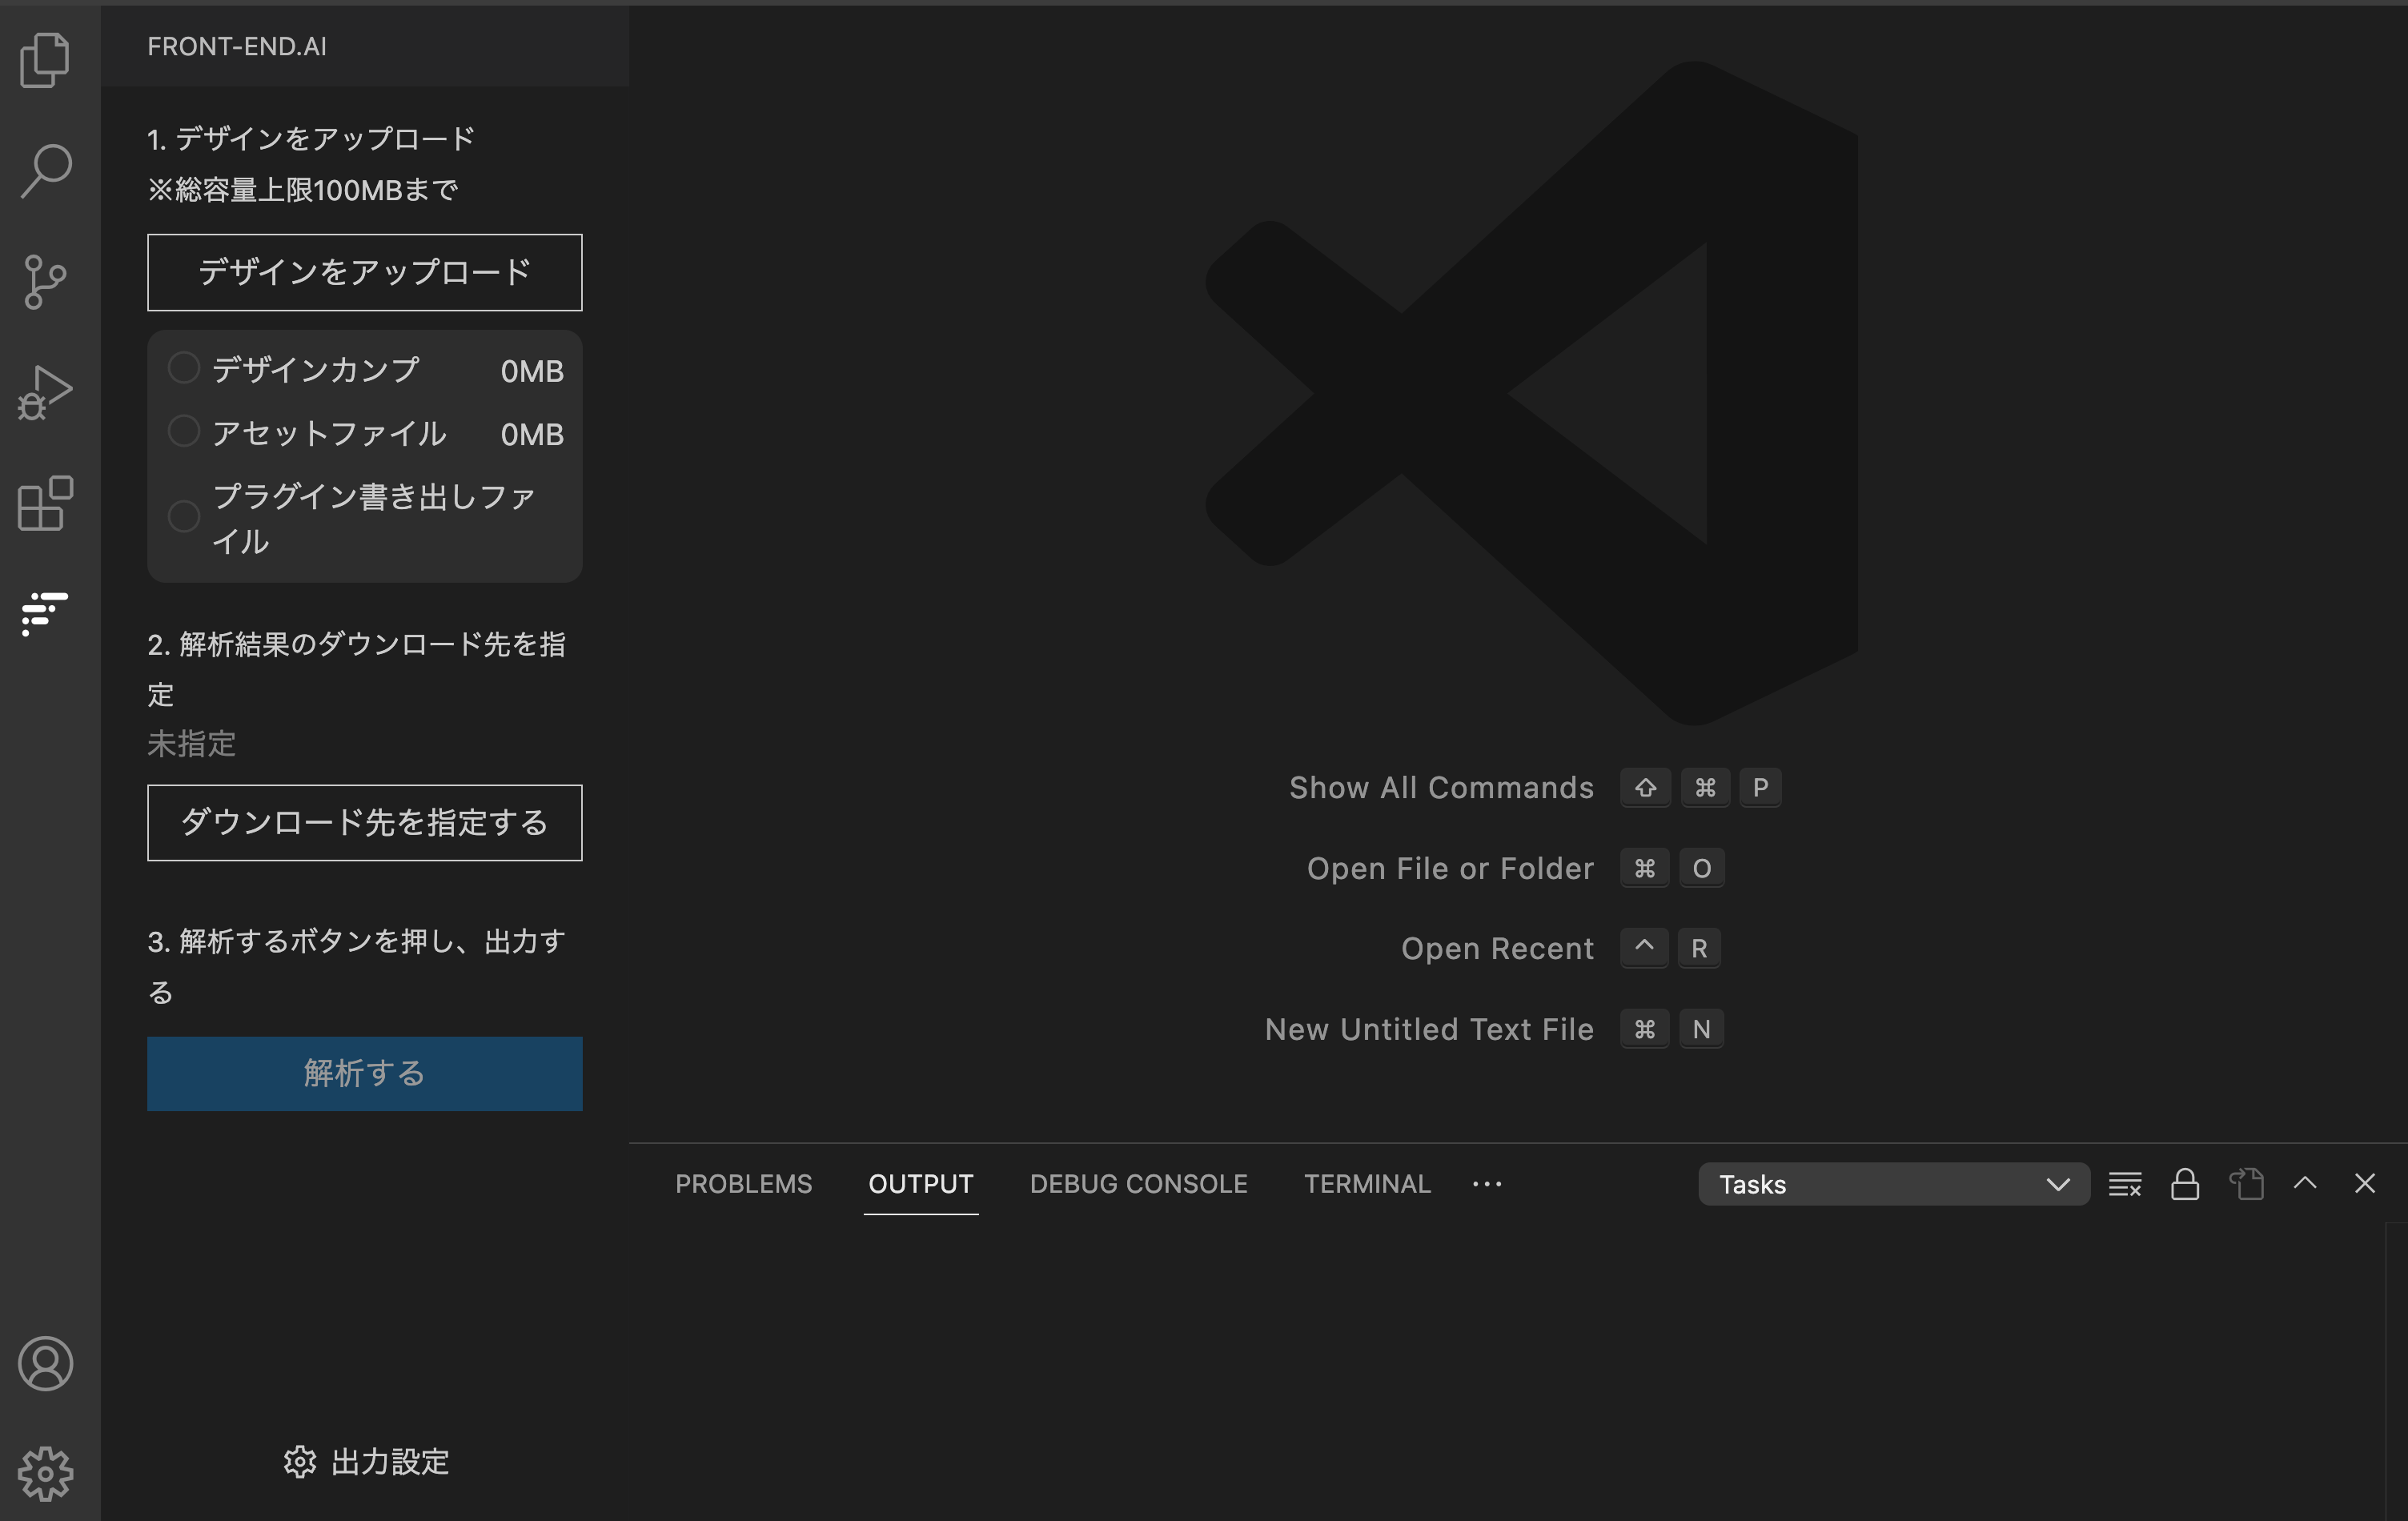 Figma/XDR[huFRONT-END.AIvA Visual Studio CodeAg@\[X